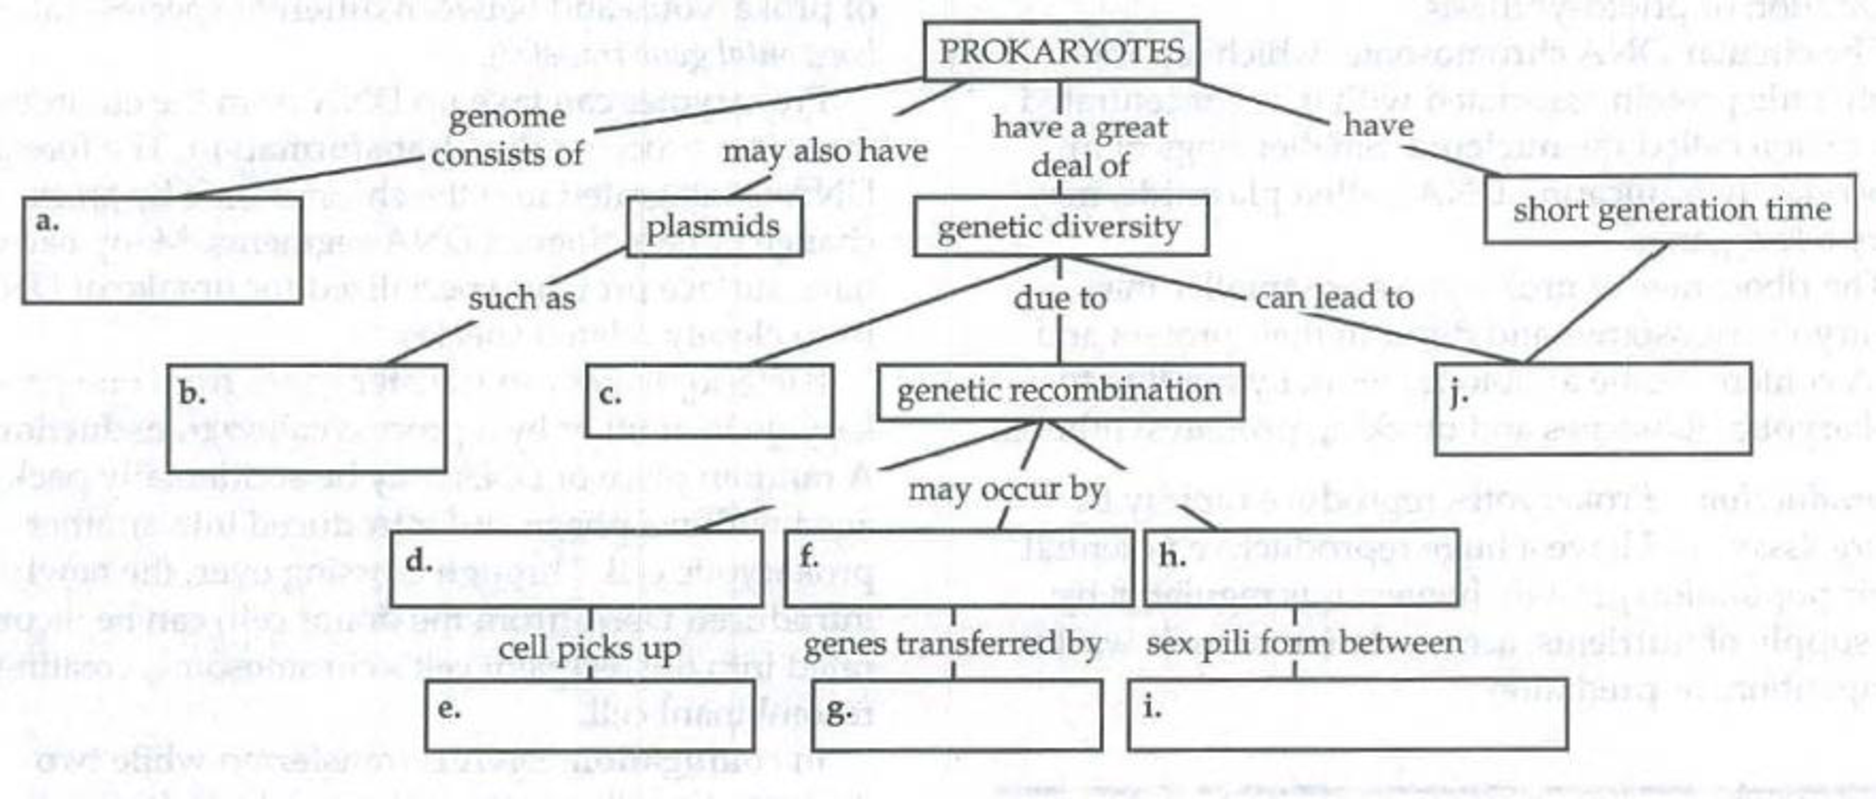 Chapter 27, Problem 2IQ, Complete the following concept map that summarizes the genetic characteristics of prokaryotes. 